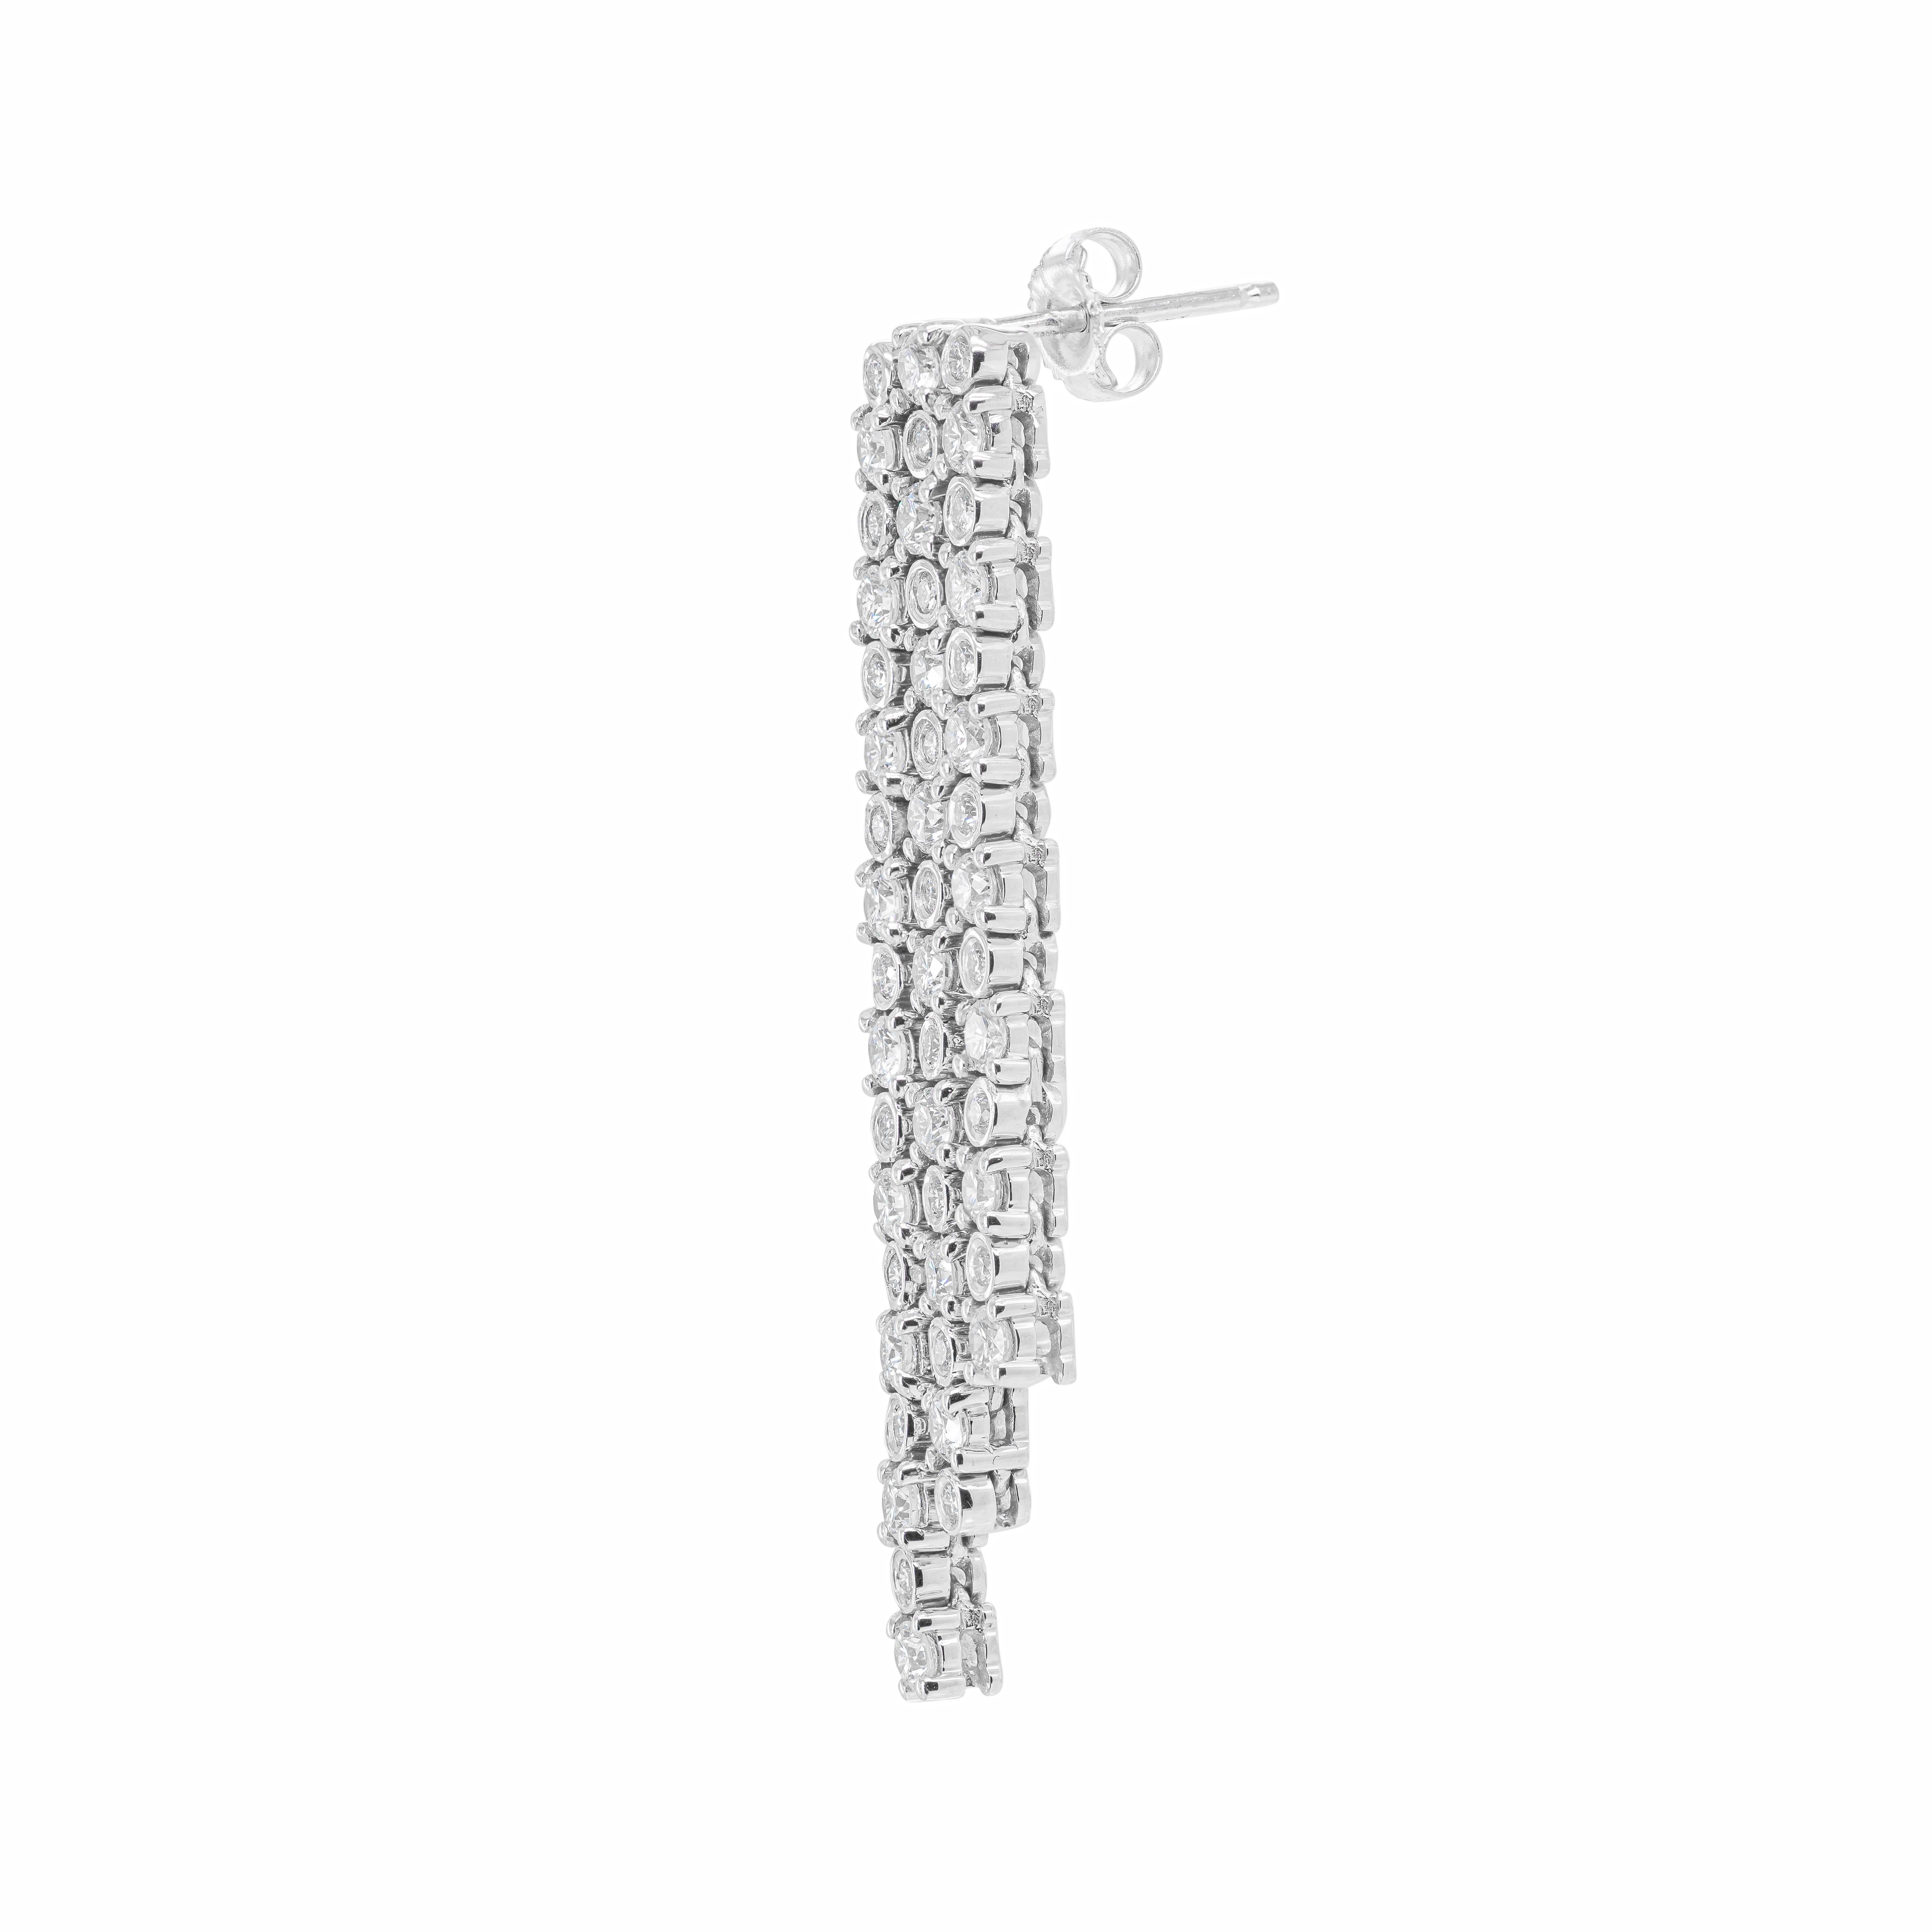 These exquisite drop earrings feature a fringe dangle design masterfully crafted from 18 carat white gold. Each earring is inlaid with 48 round brilliant cut diamonds mounted in alternating four claw and rub-over open back settings, weighing